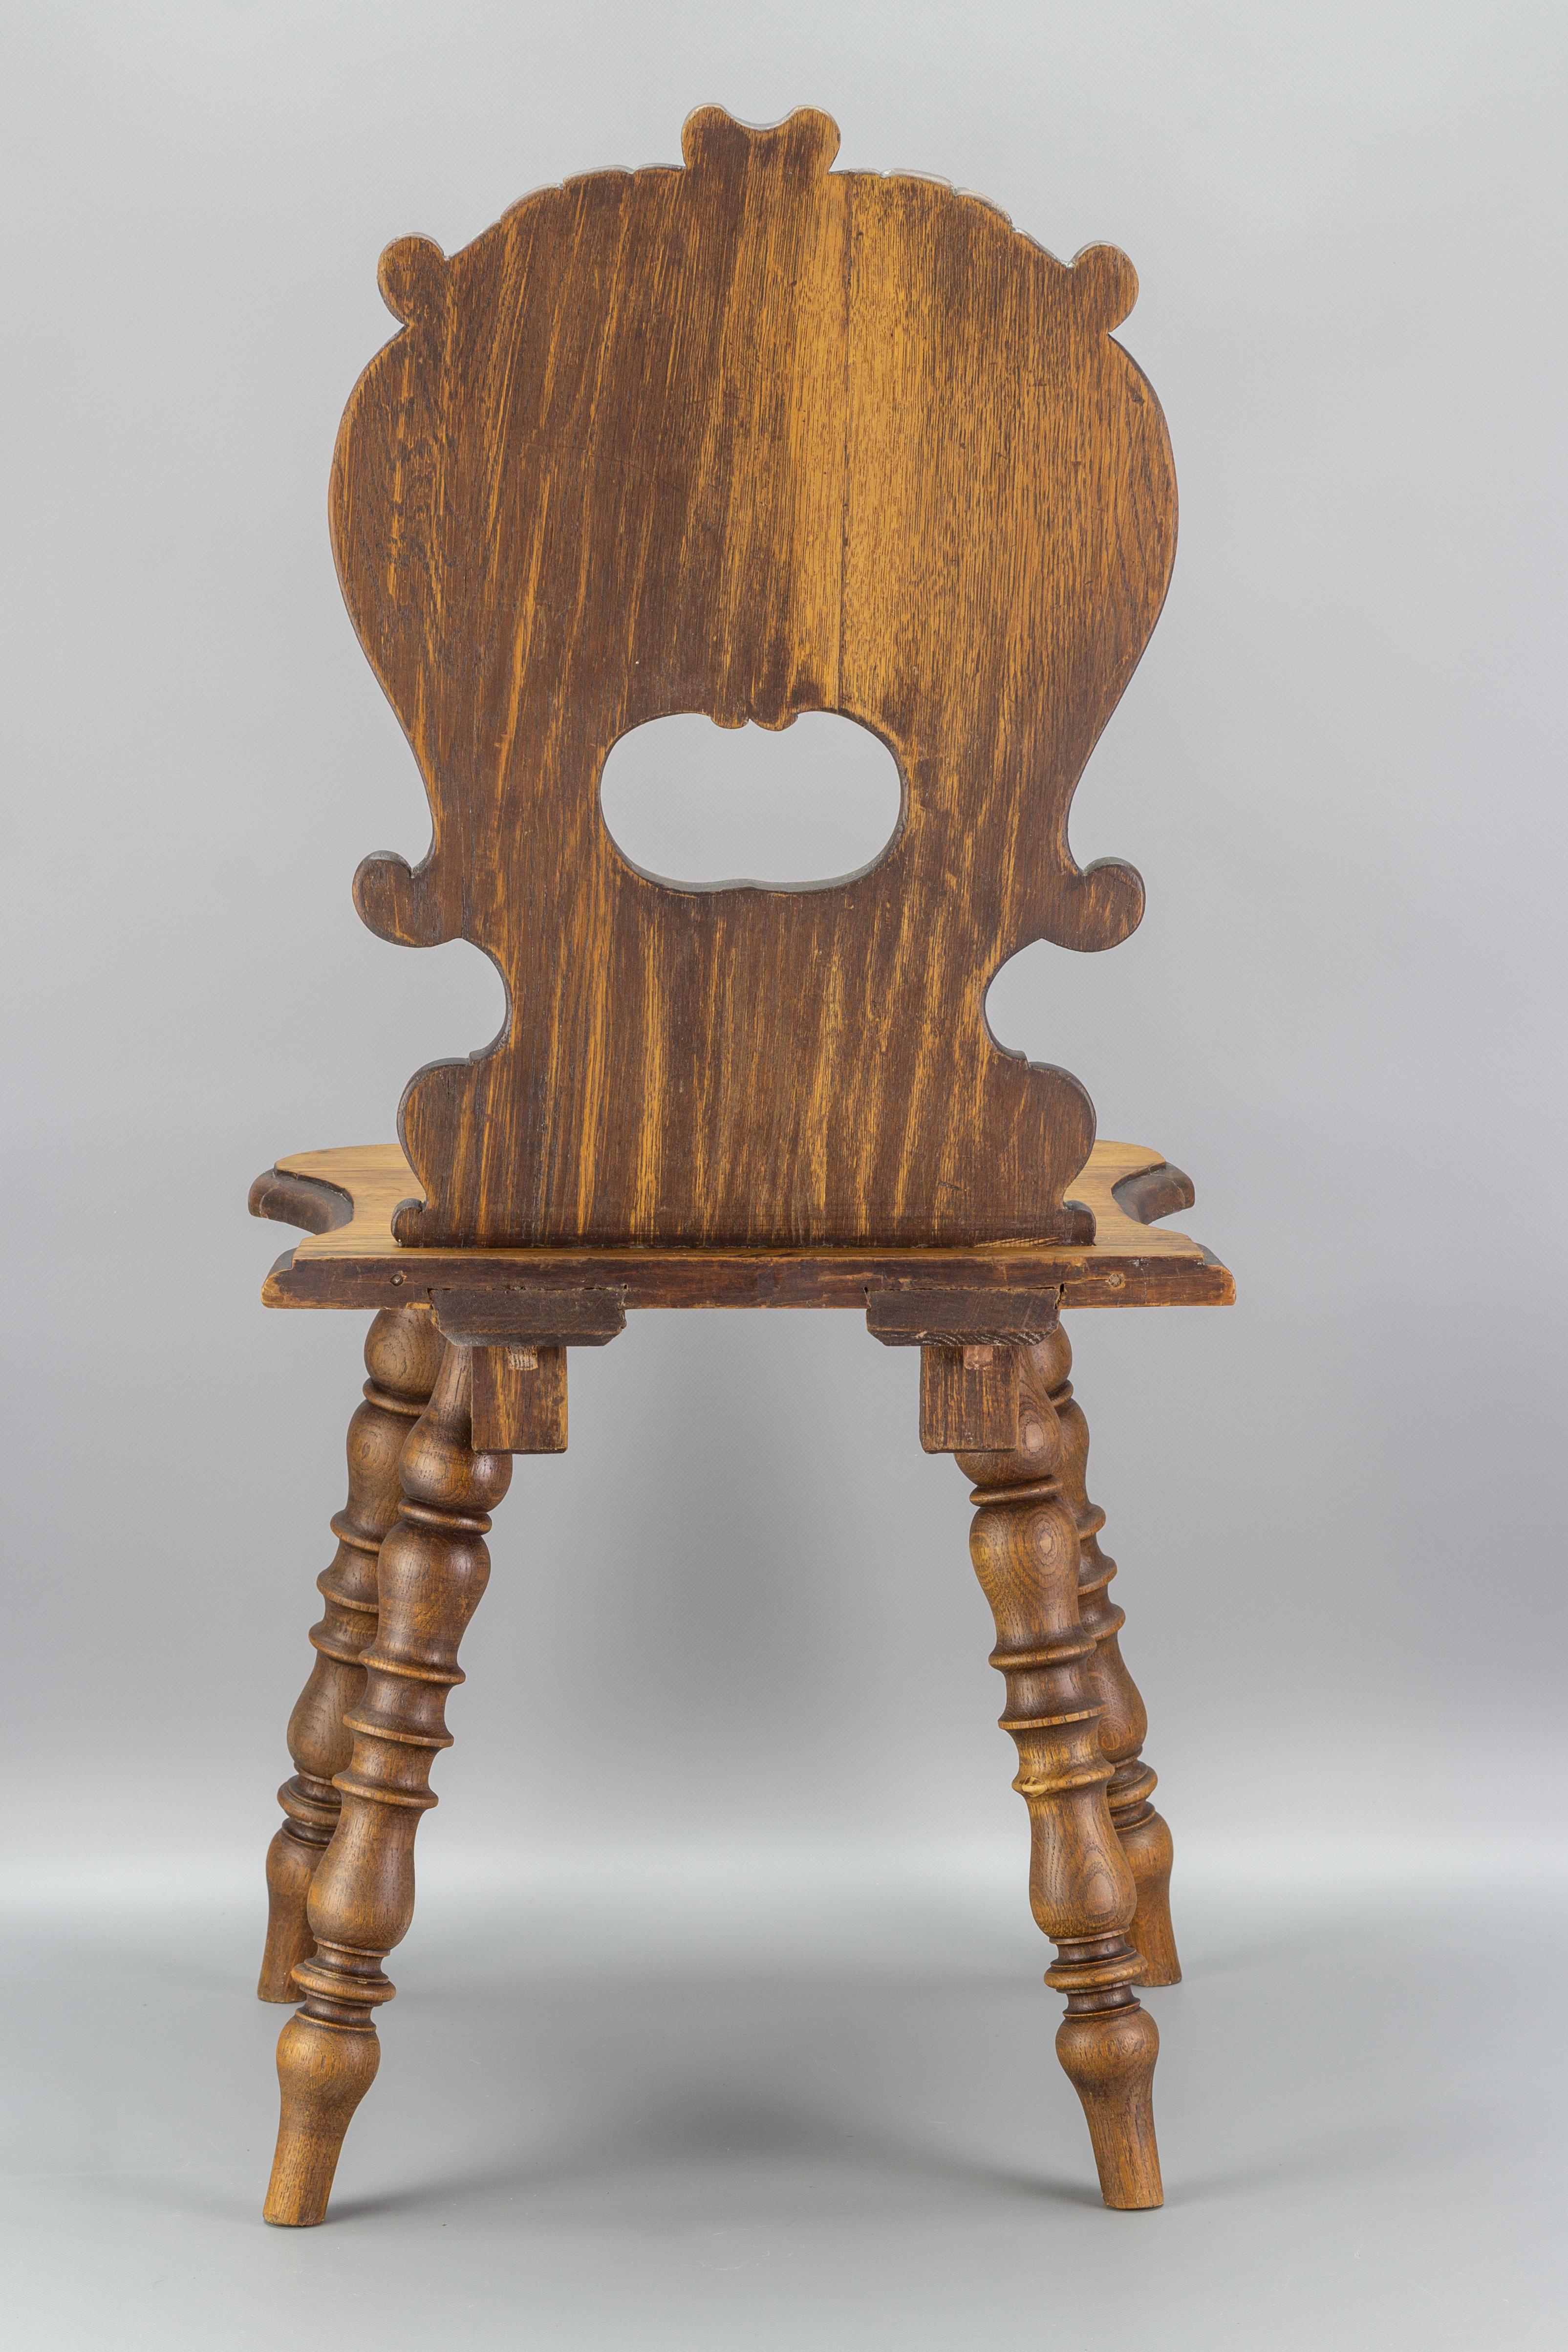 Folk Art Antique German Carved Oakwood Peasant or Hall Chair, Late 19th Century